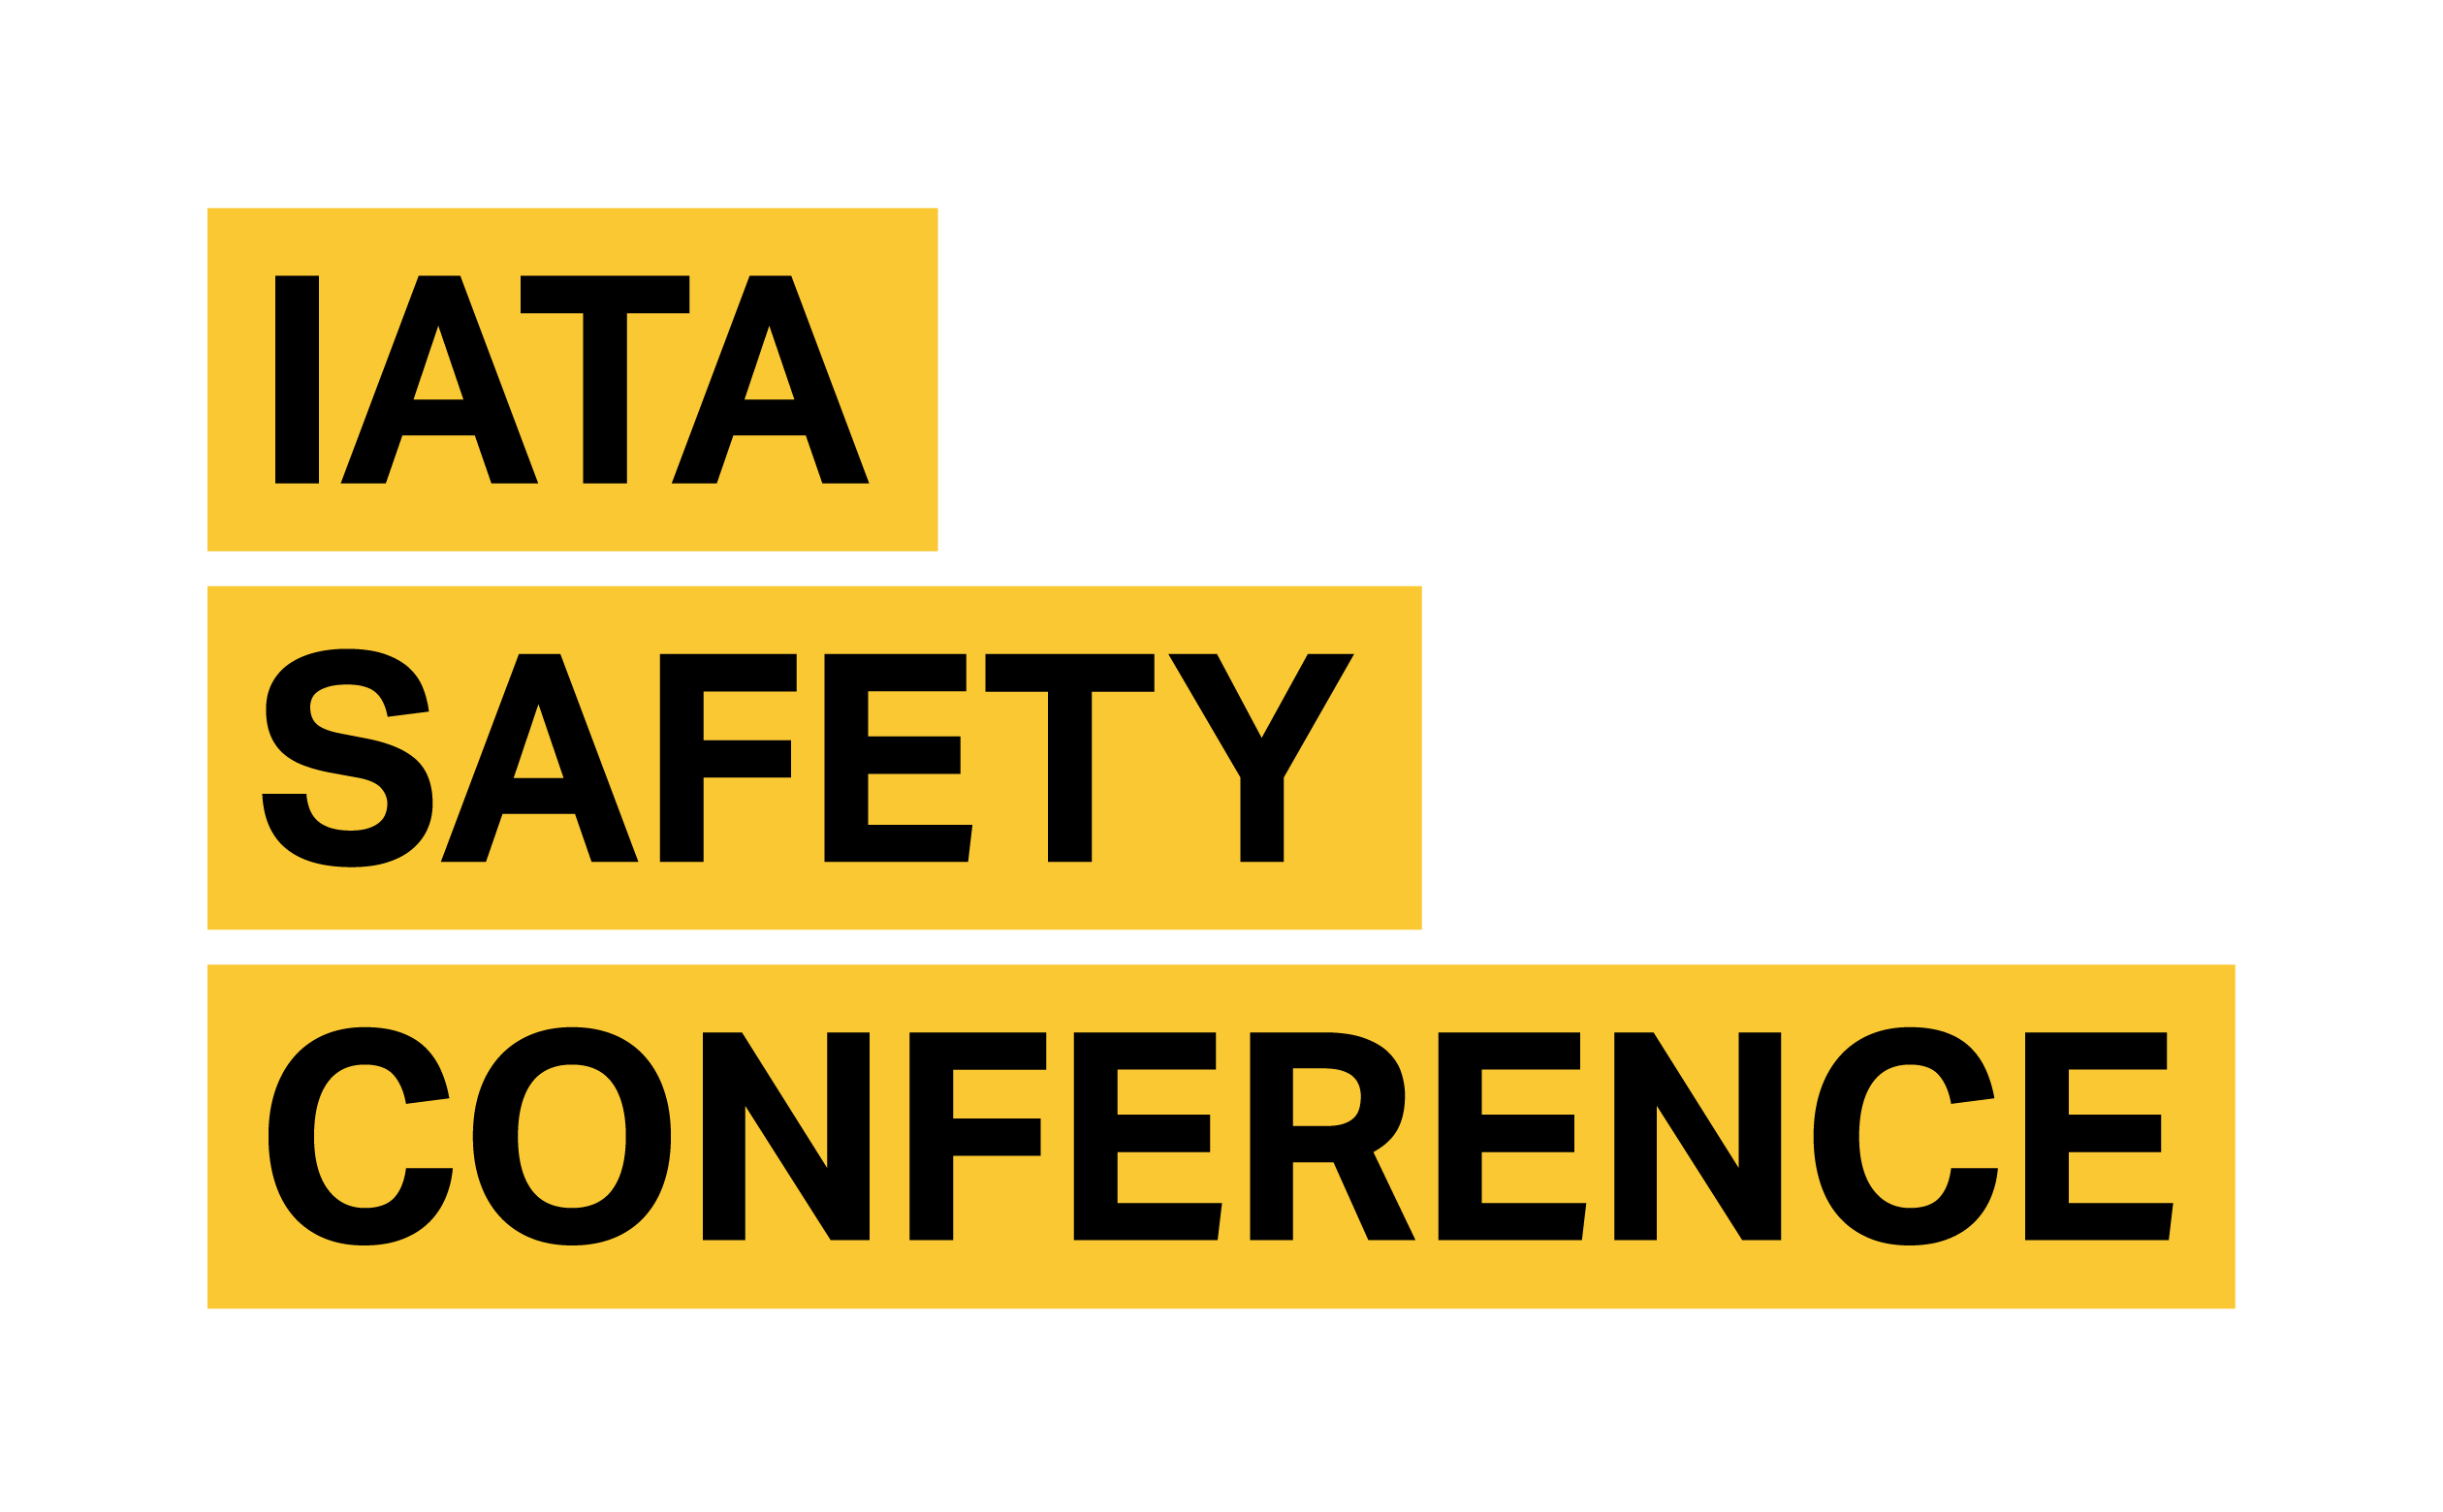 IATA Safety Conference